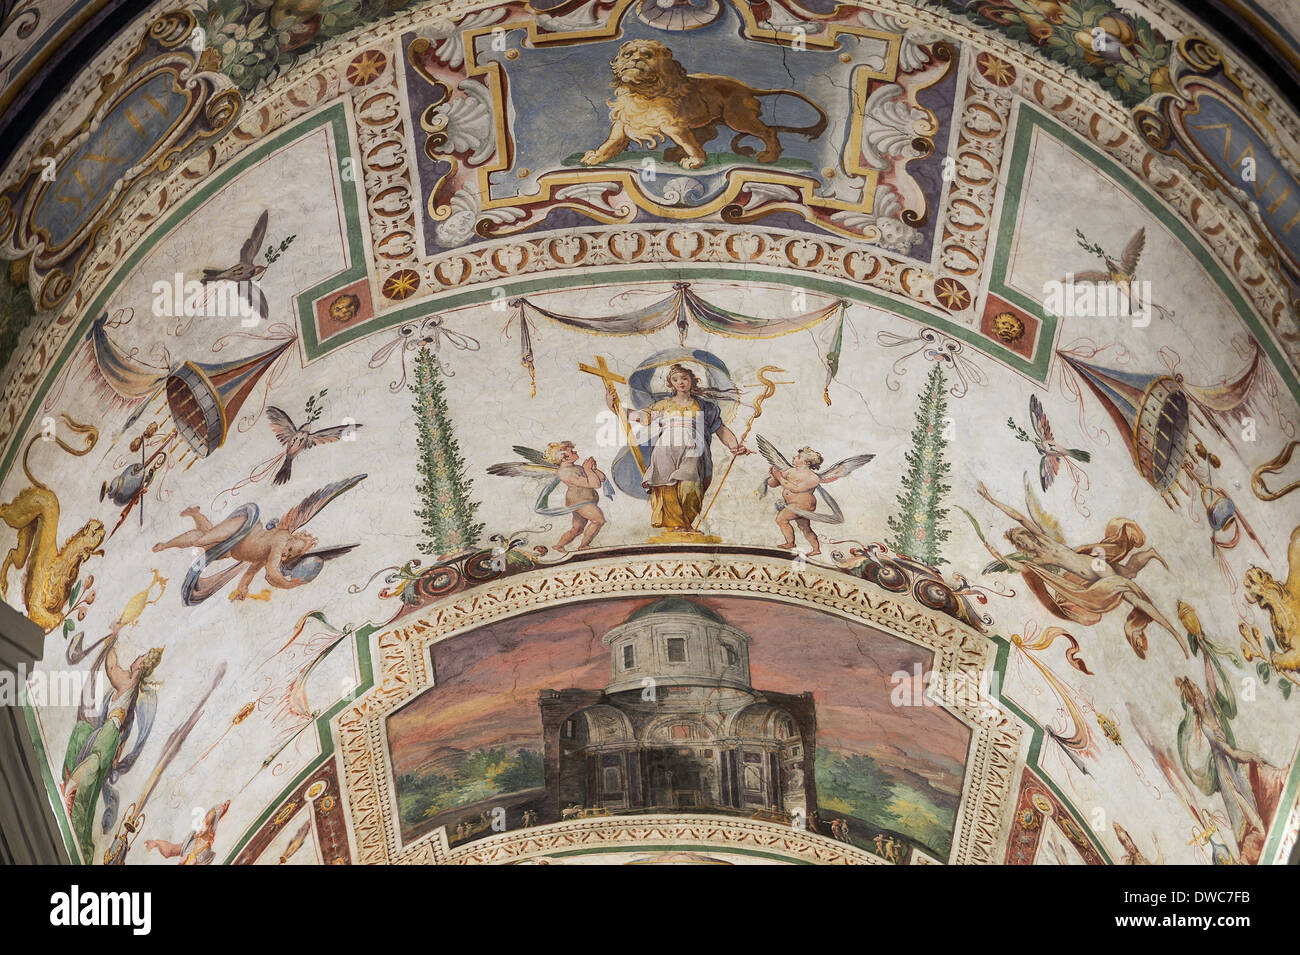 Ceiling fresco located just outside the Sistine Chapel, Vatican Museum, Rome, Italy Stock Photo